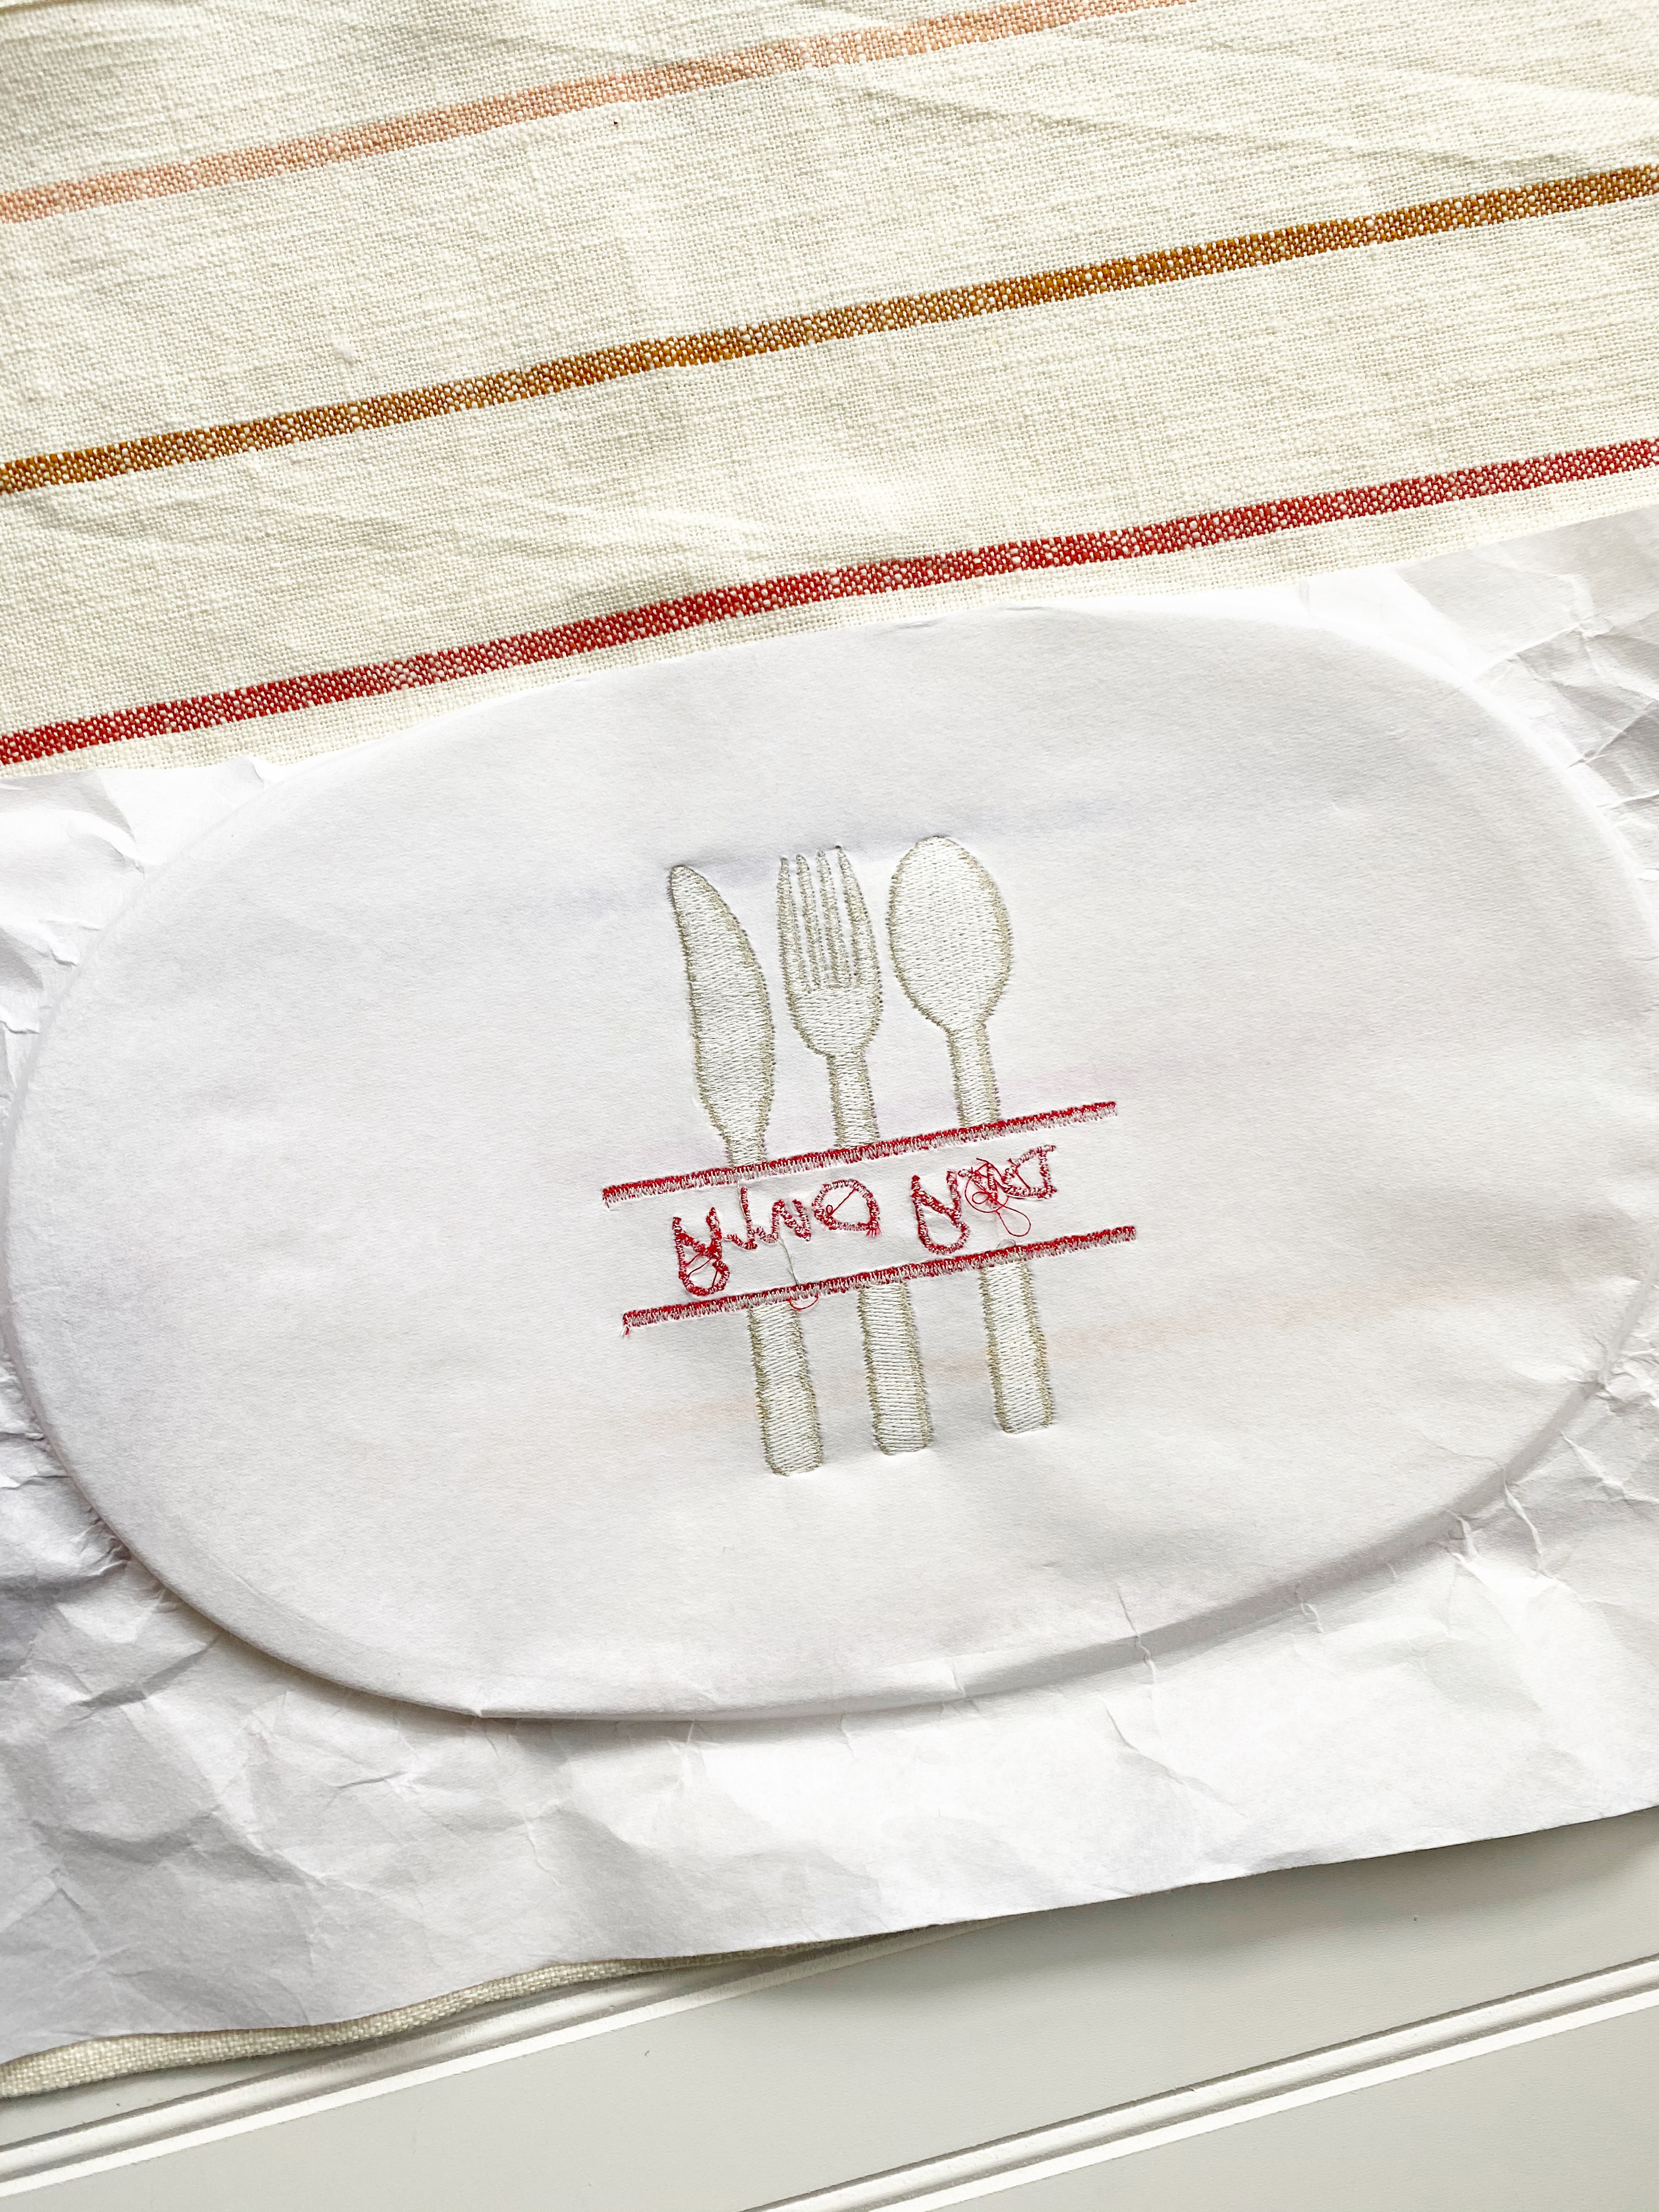 Embroidery Dish Cloth Tutorial: Unhoop and clean up